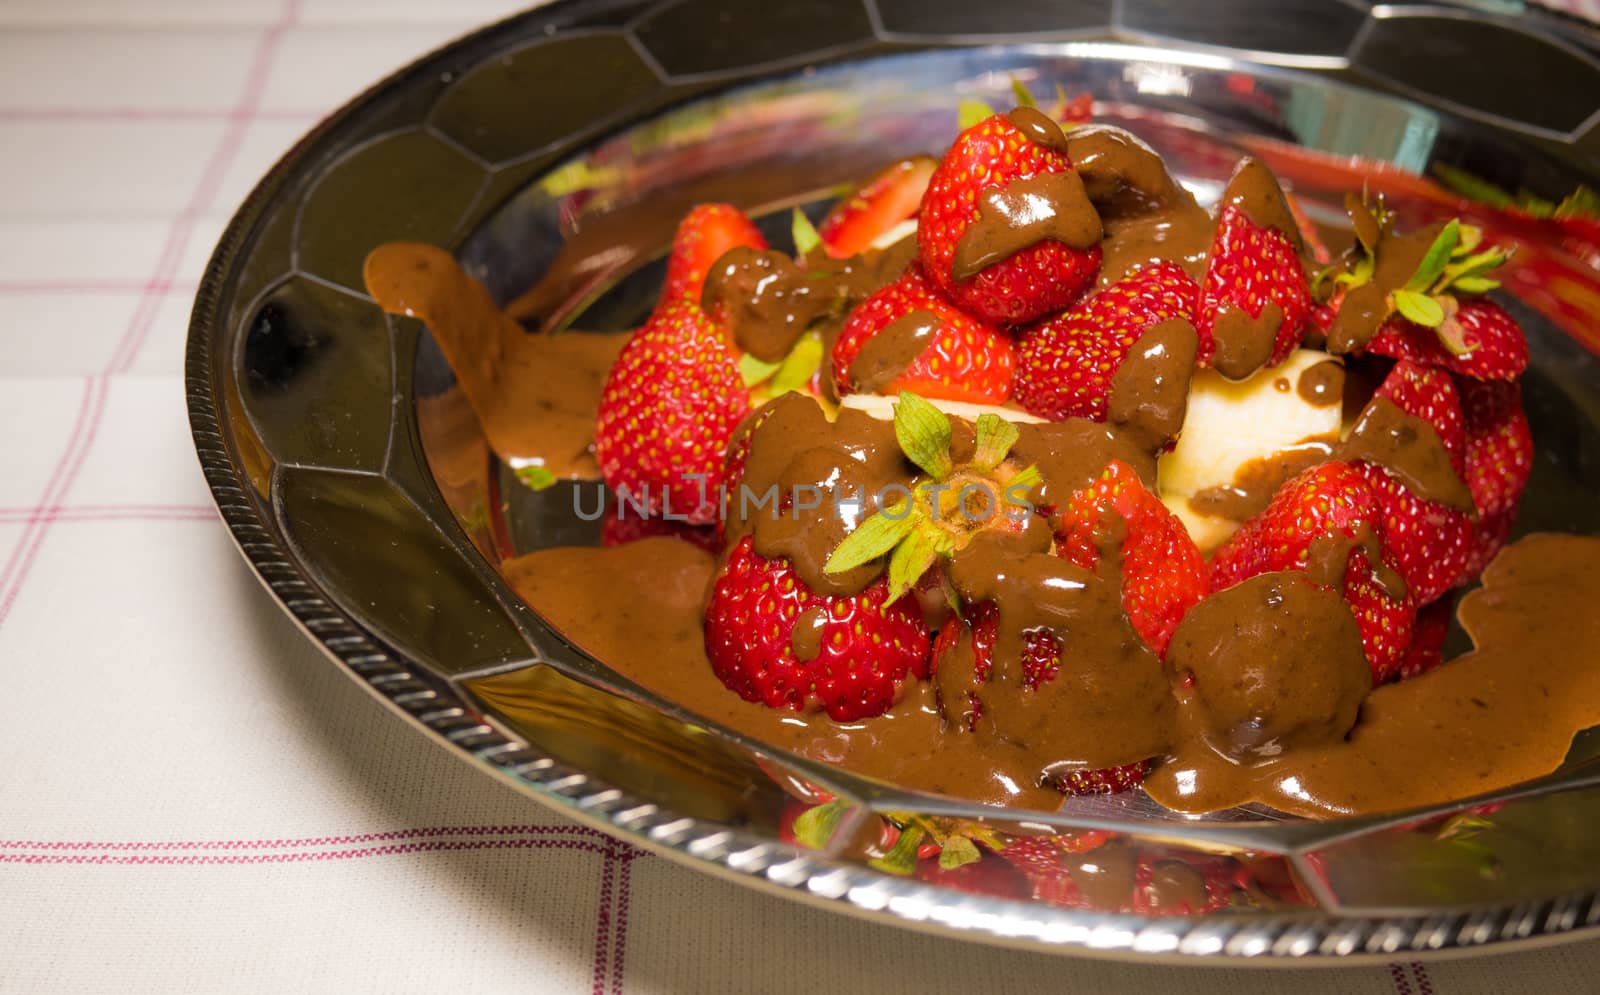 strawberry with hot chocolate on silver plate